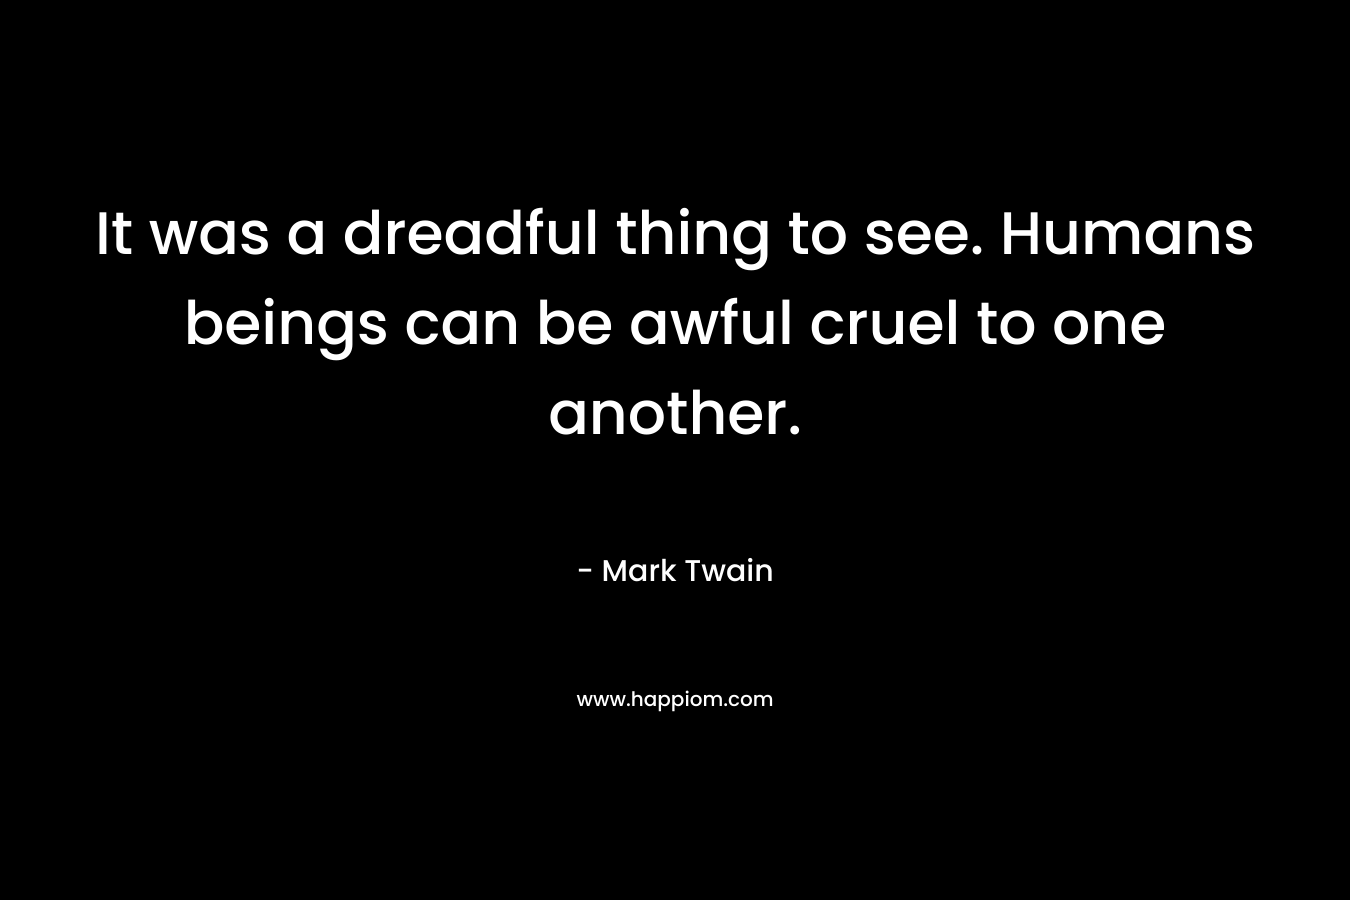 It was a dreadful thing to see. Humans beings can be awful cruel to one another. – Mark Twain